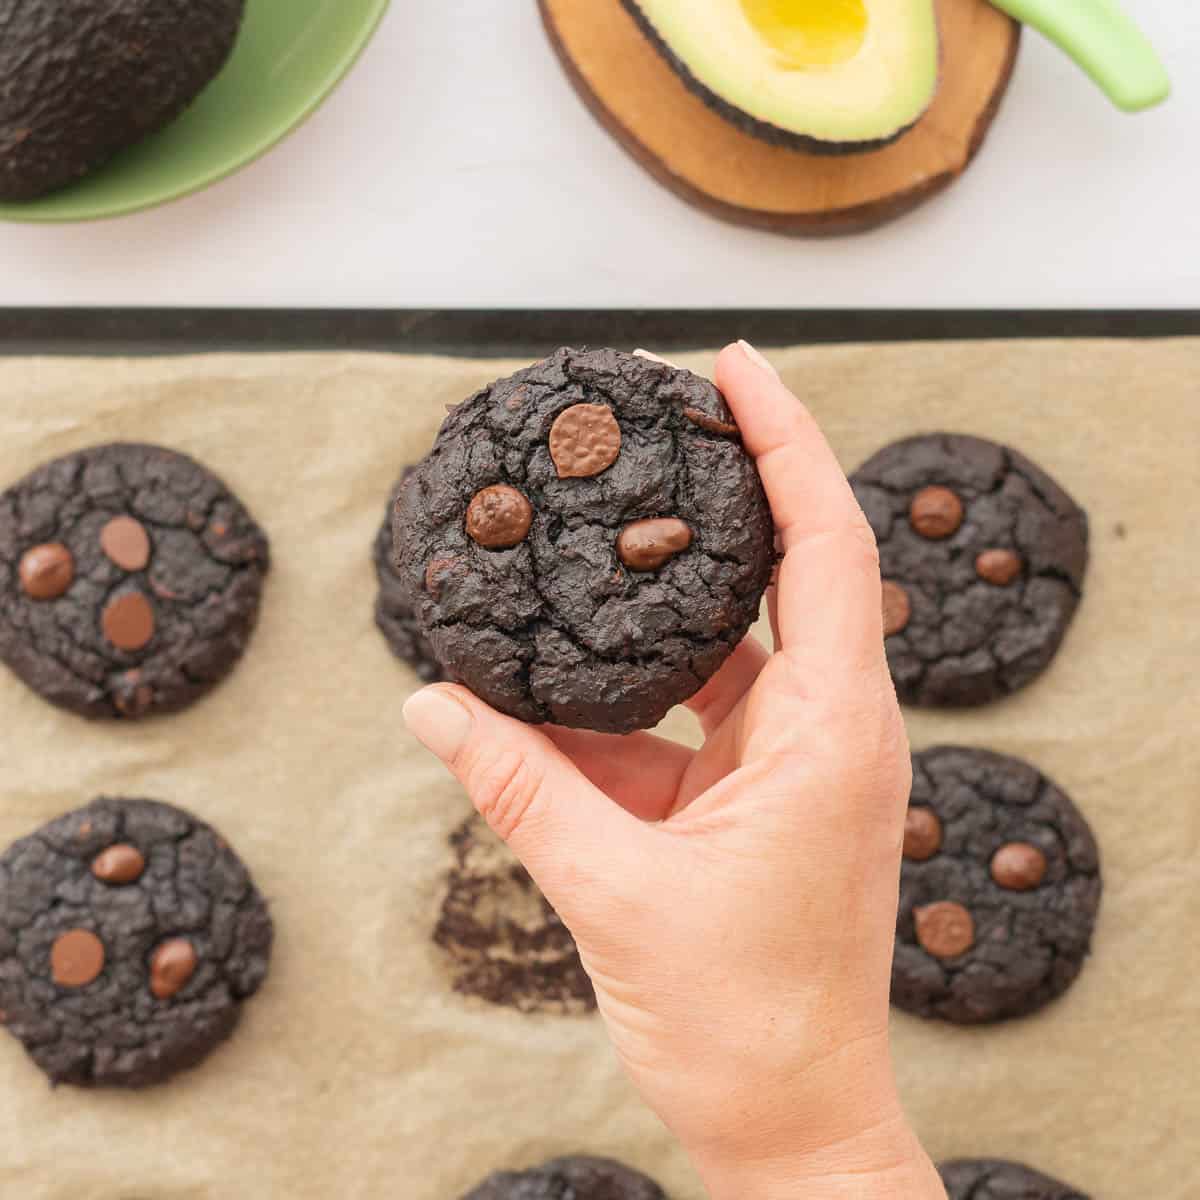 A chocolate cookie being held above a baking tray and bowl of halved avocados.